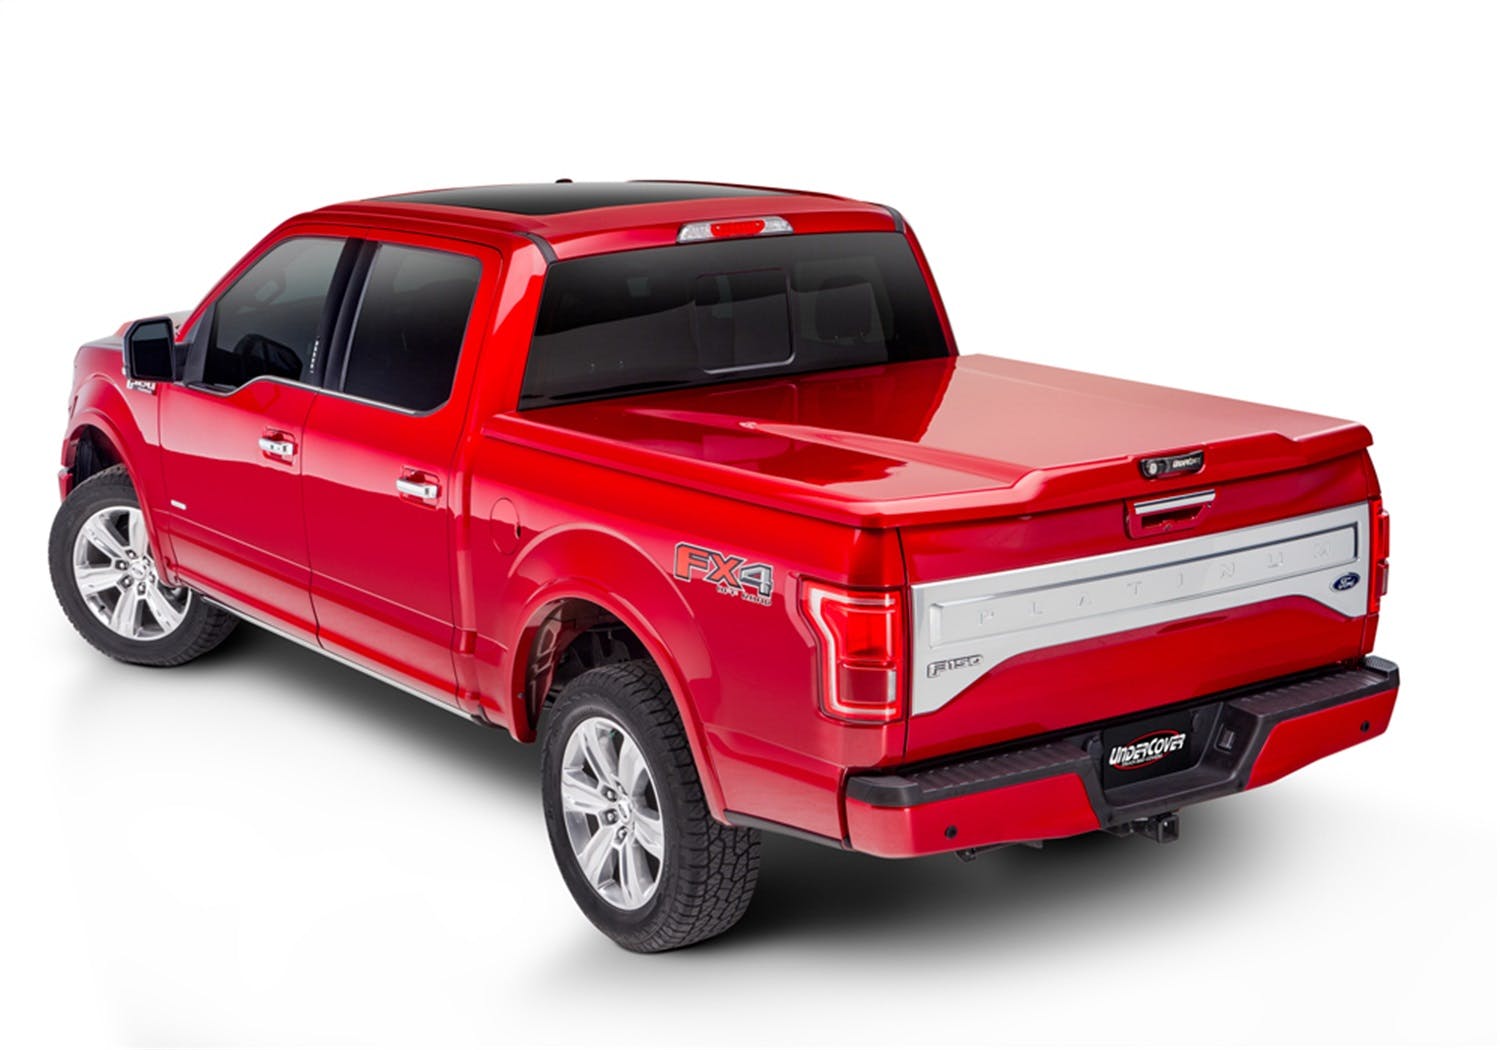 UnderCover UC5098S Elite Smooth Tonneau Cover, Smooth Finish, Must Be Painted